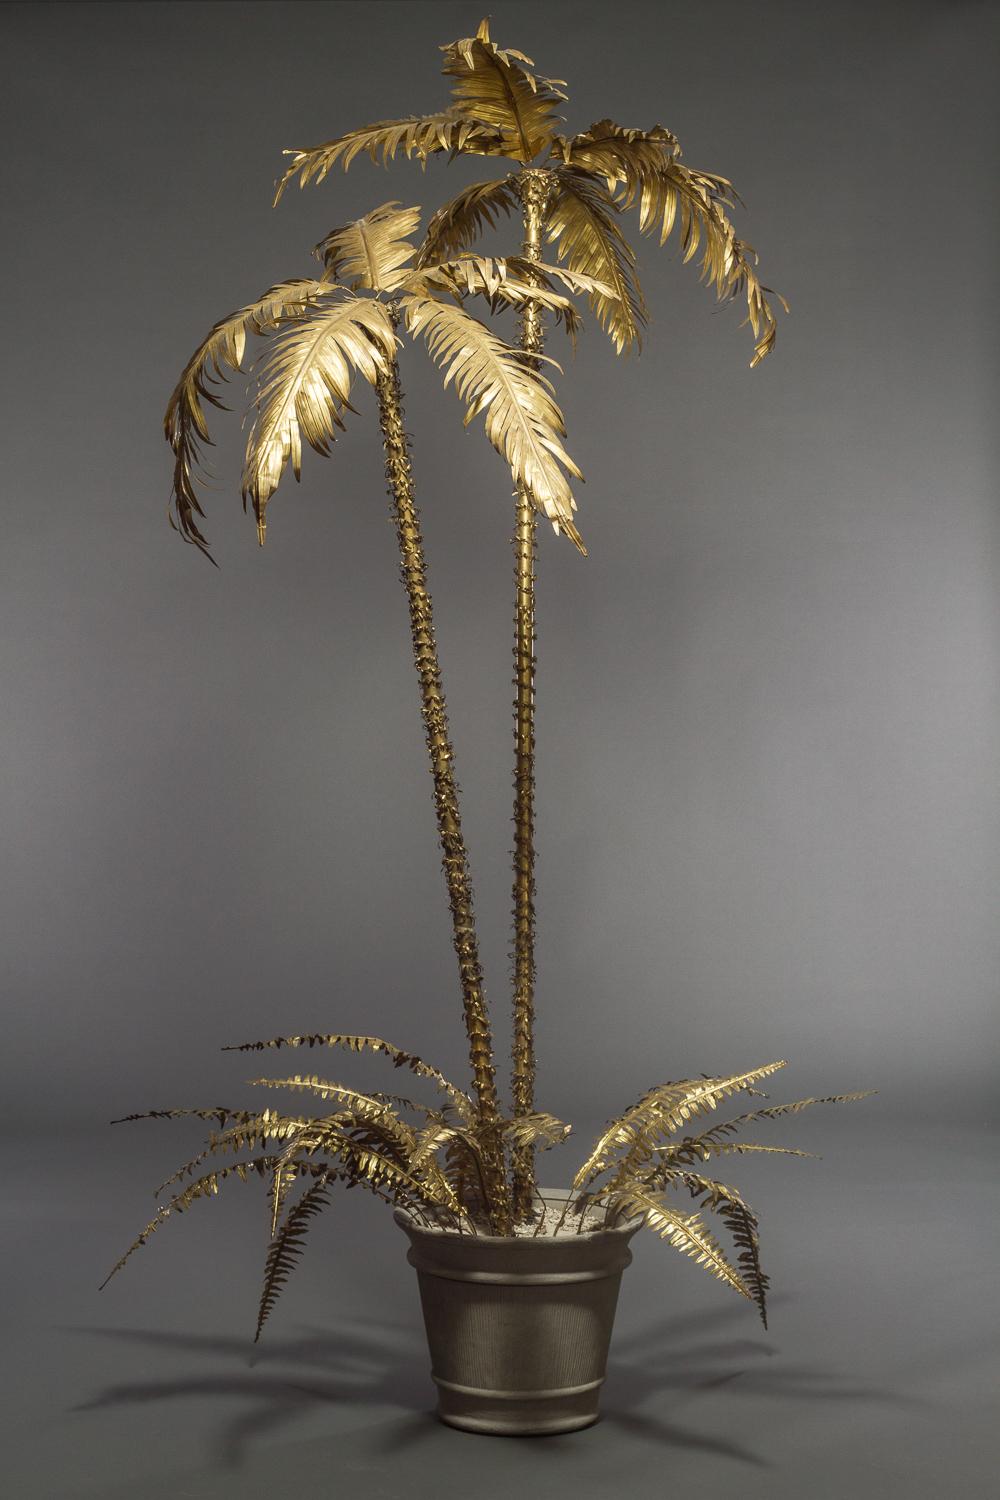 With detachable fronds. Nickel plated metal. Dimensions variable.